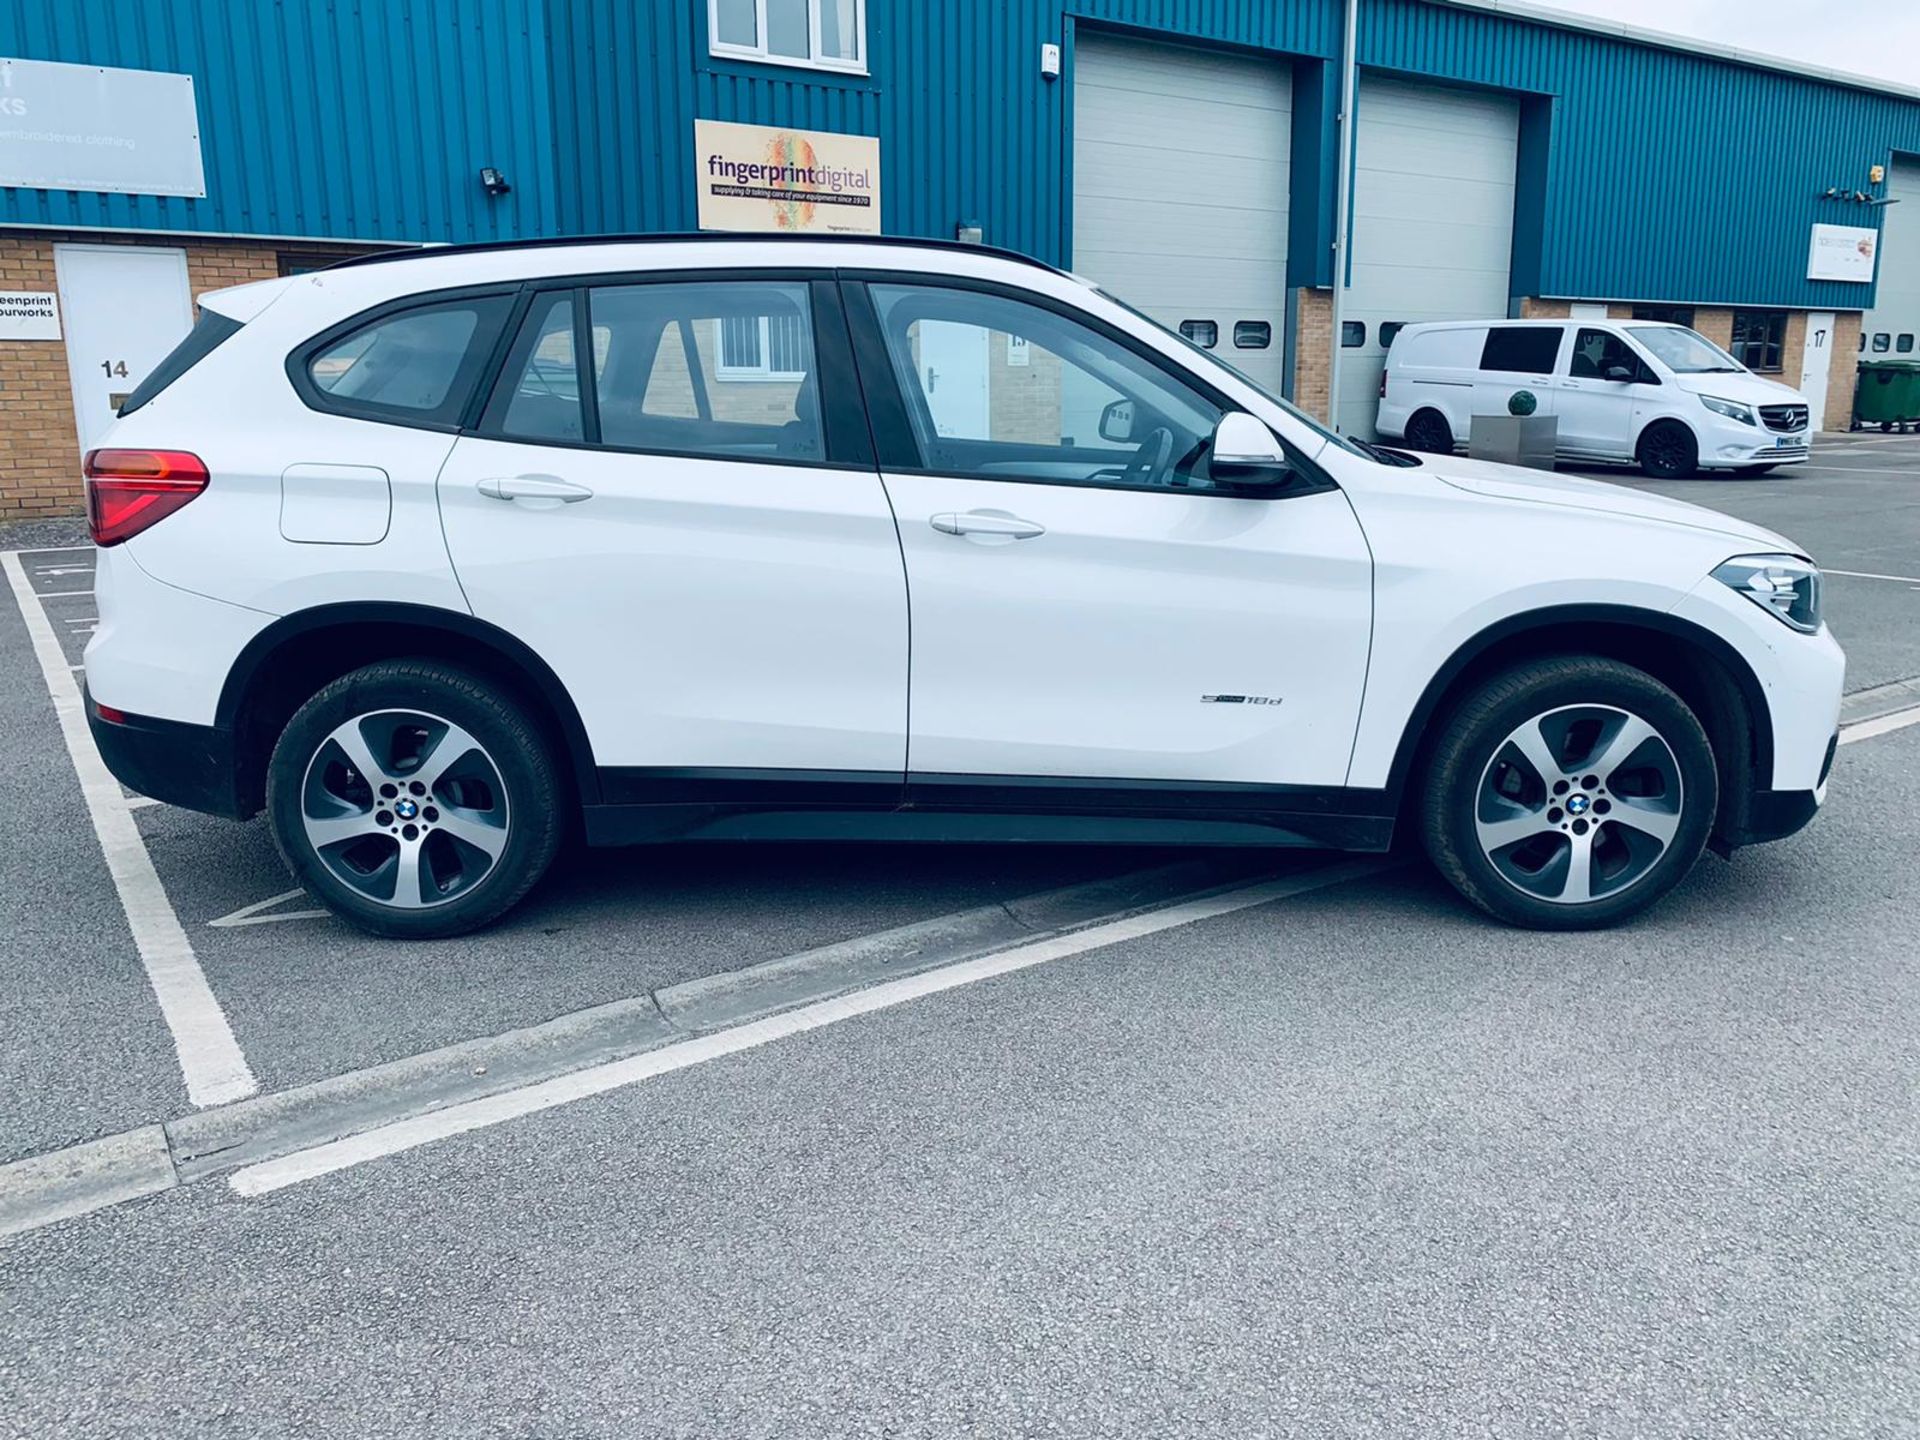 BMW X1 sDrive 2.0d Special Equipment Auto - 2018 Reg - Service History - 1 Owner From New - Image 5 of 25